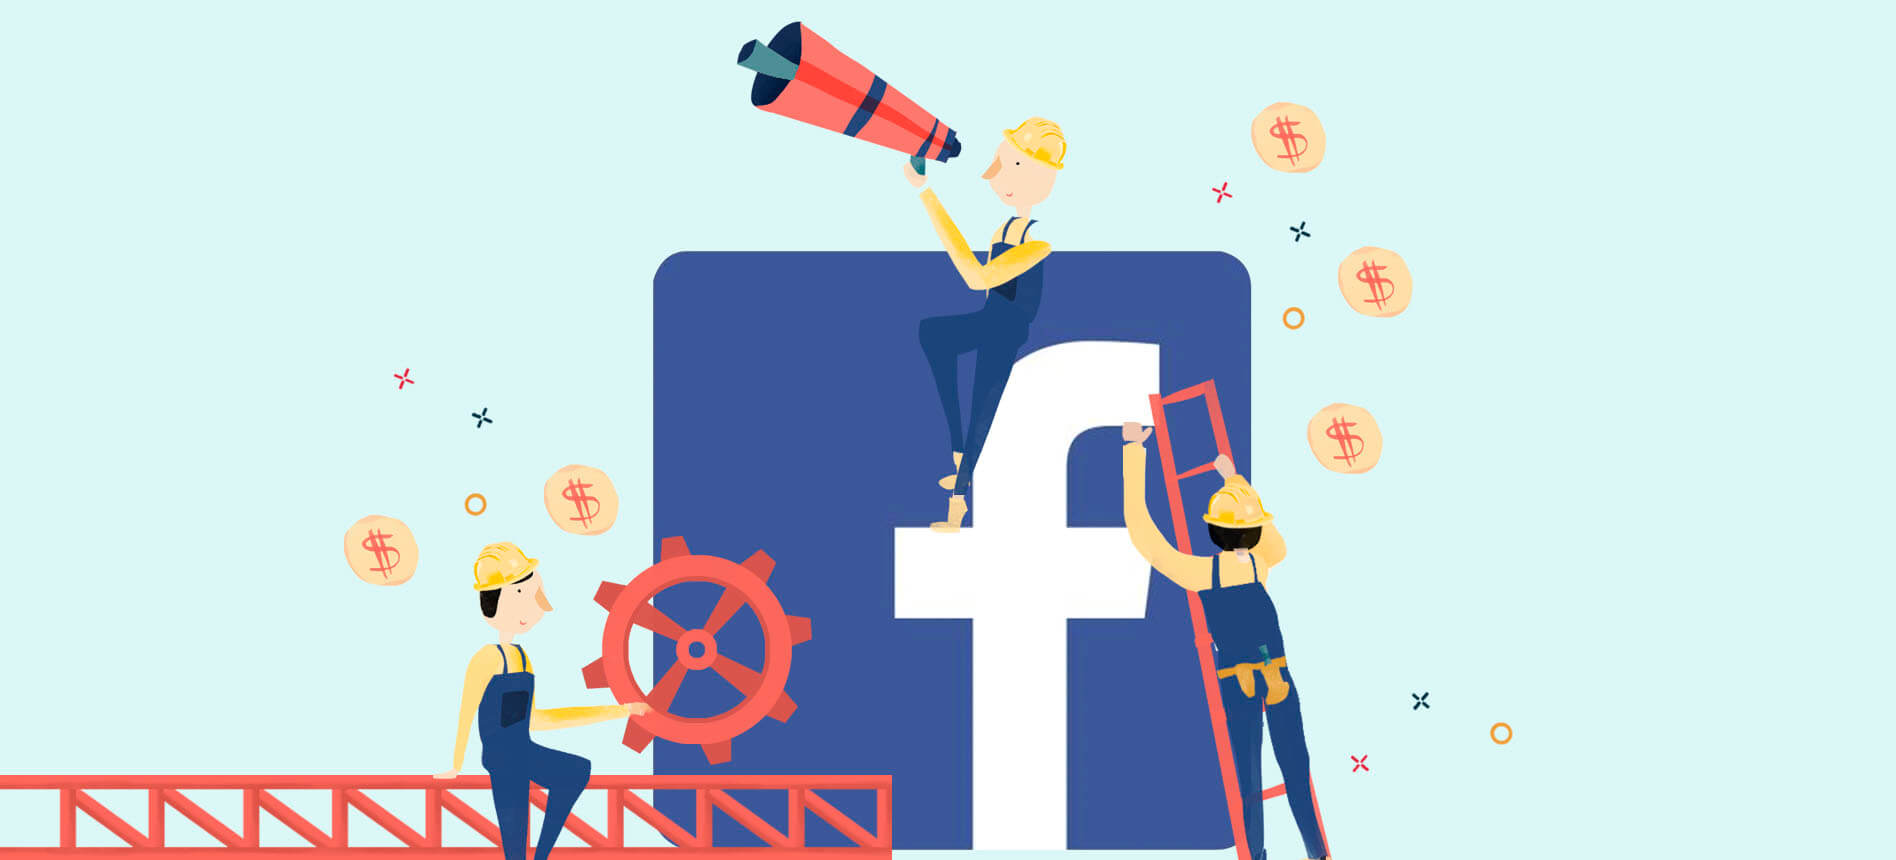 facebook marketing consultants firm, facebook marketing consultants, facebook marketing definition, facebook marketing consultant, facebook advertising consultant, facebook marketing firms, facebook consultant firms in india